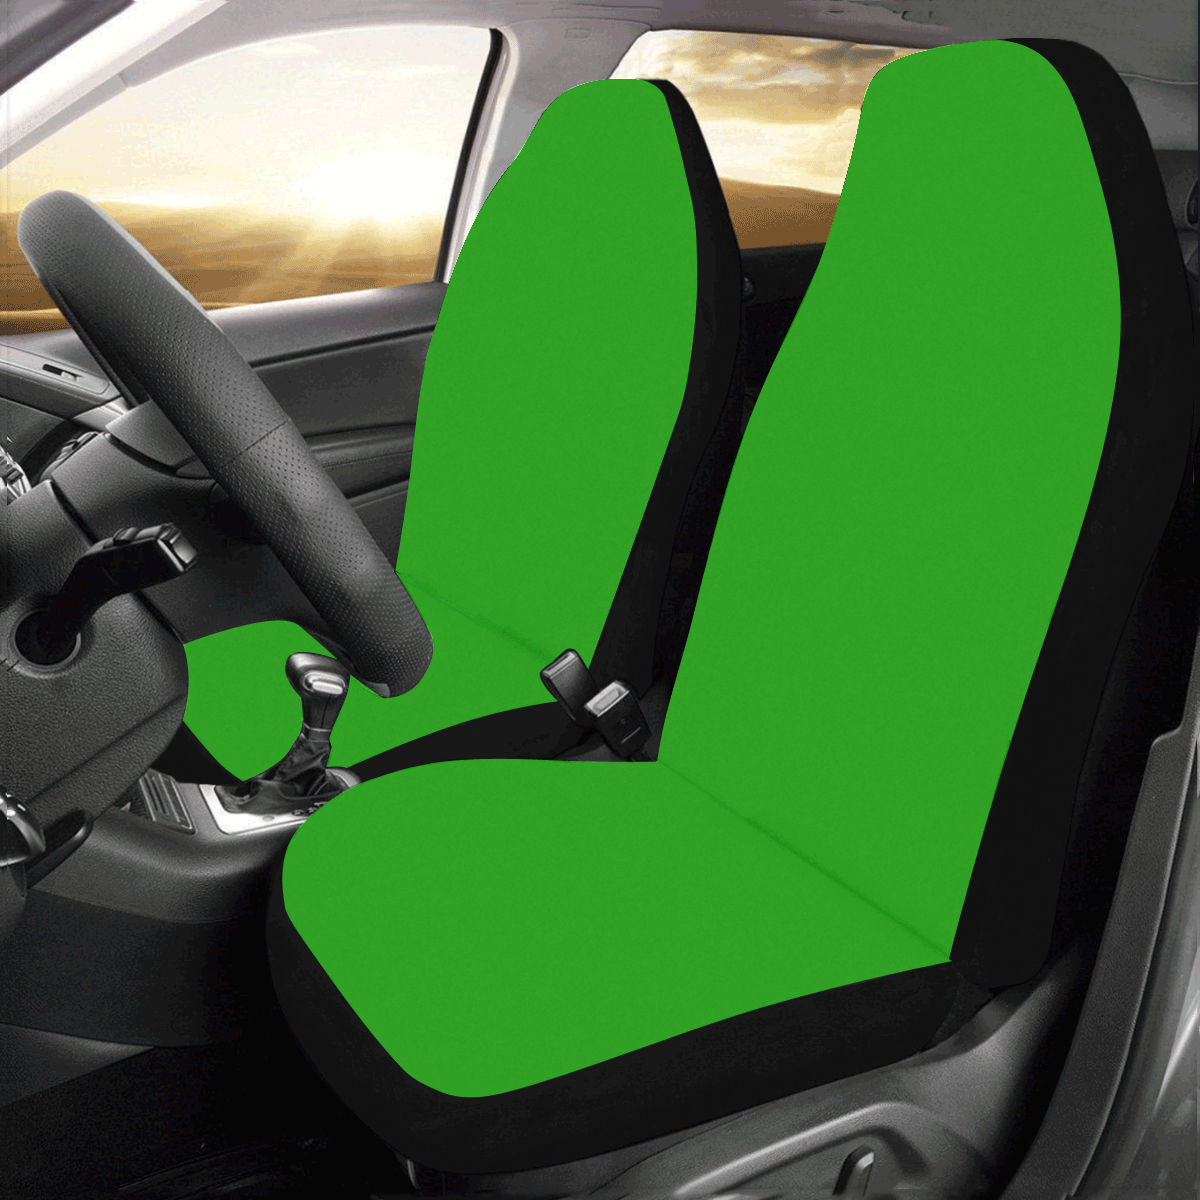 Notable Neon Green Solid Colored Car Seat Covers (Set of 2)